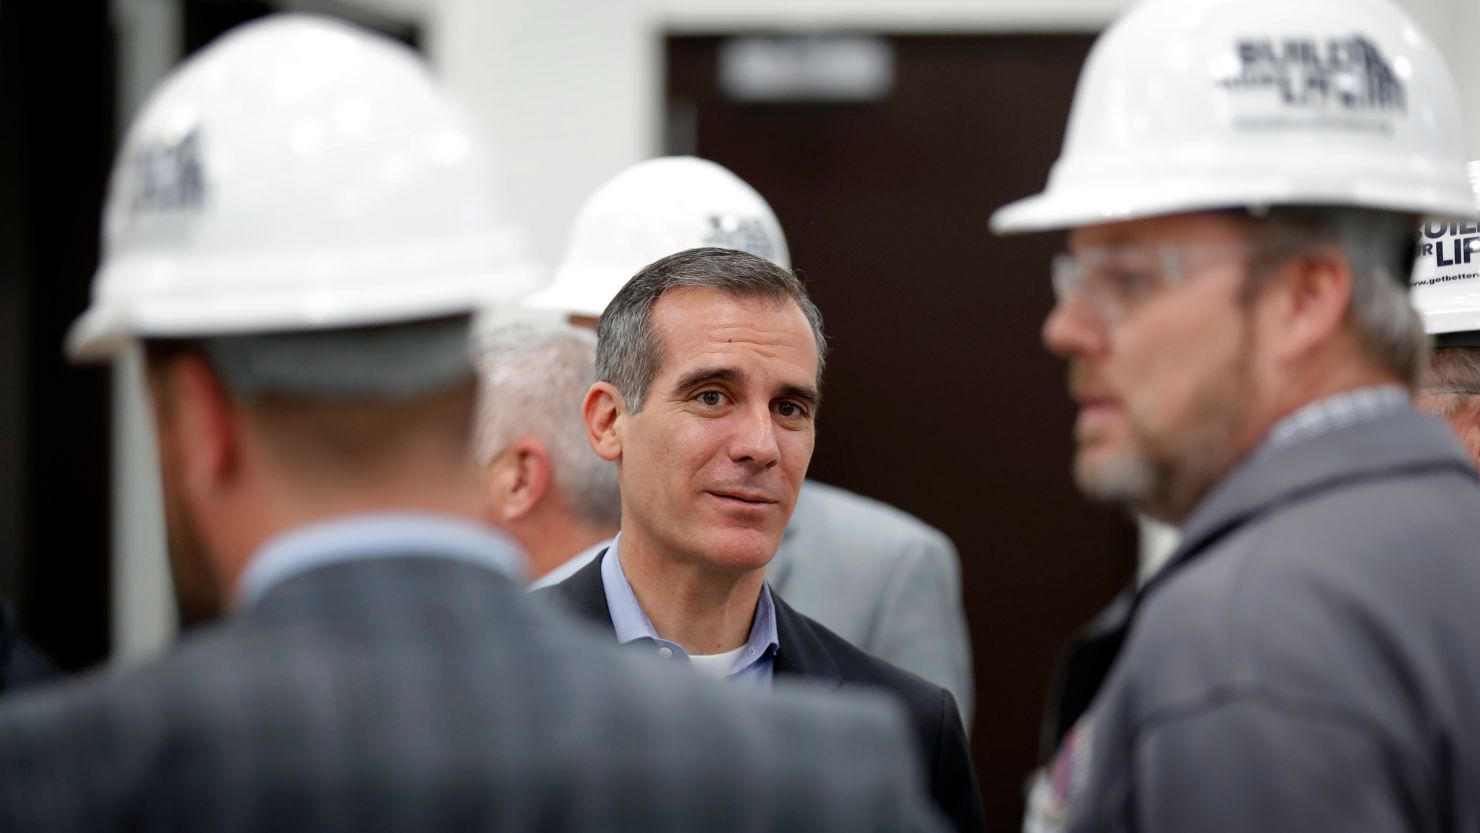 Los Angeles Mayor Eric Garcetti, center, visits with staff during a tour of a carpenters training facility on Friday, April 13, 2018, in Altoona, Iowa.